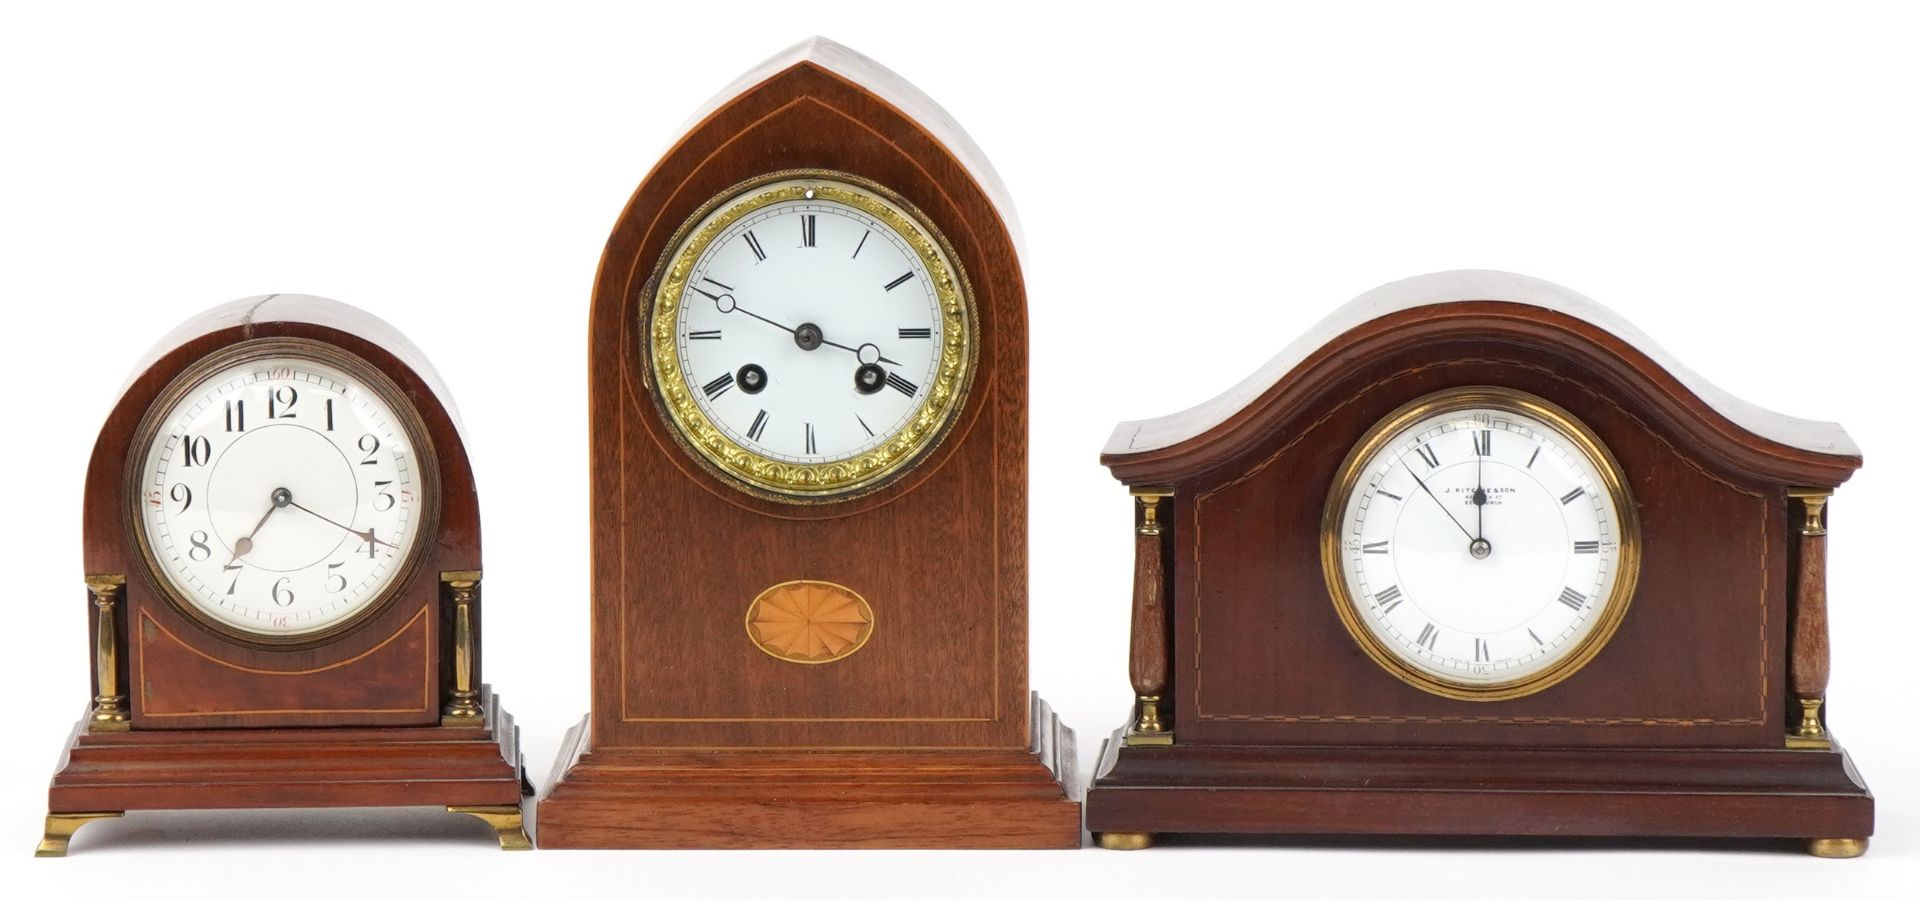 Three Edwardian inlaid mahogany mantle clocks with enamelled dials, the largest 26cm high : For